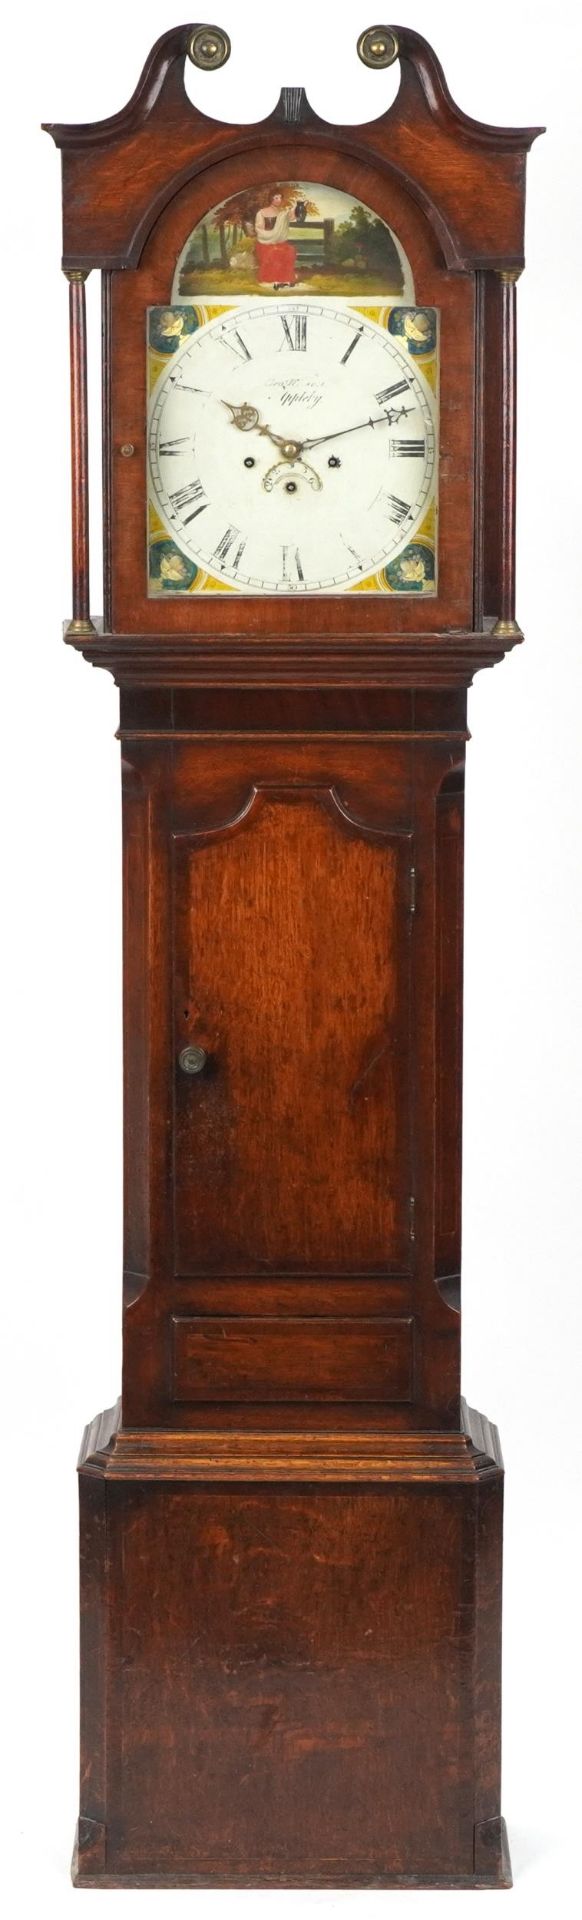 19th century oak cases longcase clock with painted dial having Roman and Arabic numerals,